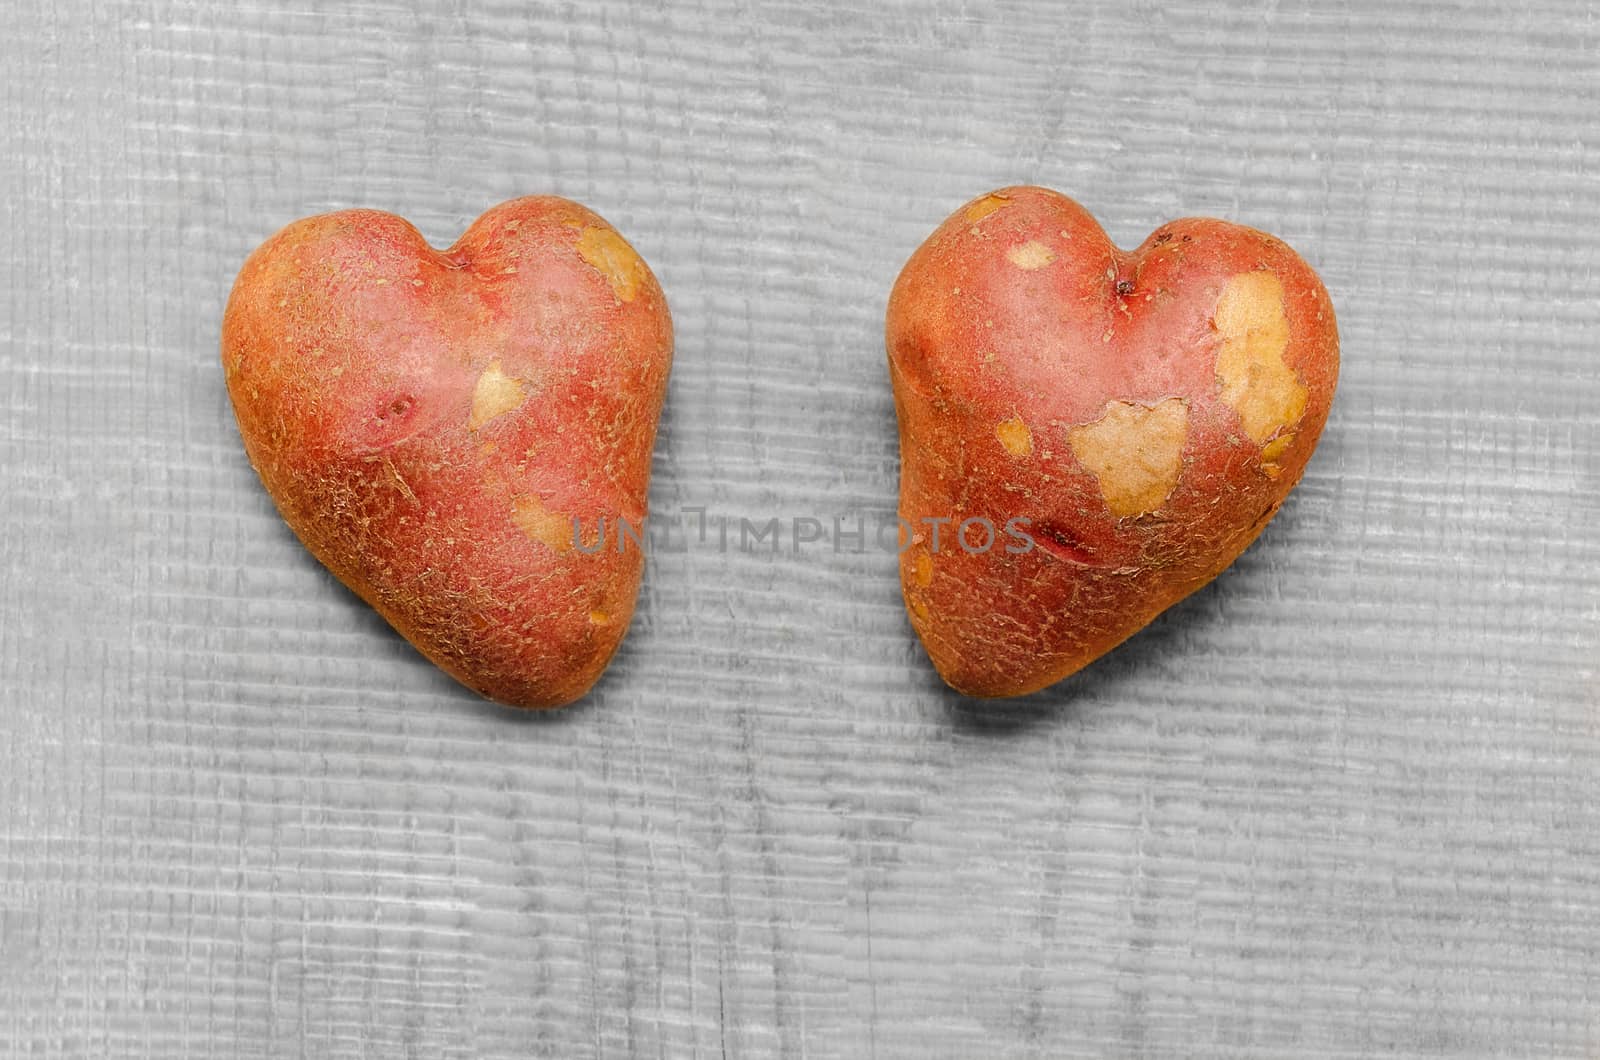 Pink potatoes on a gray wooden background by Gaina